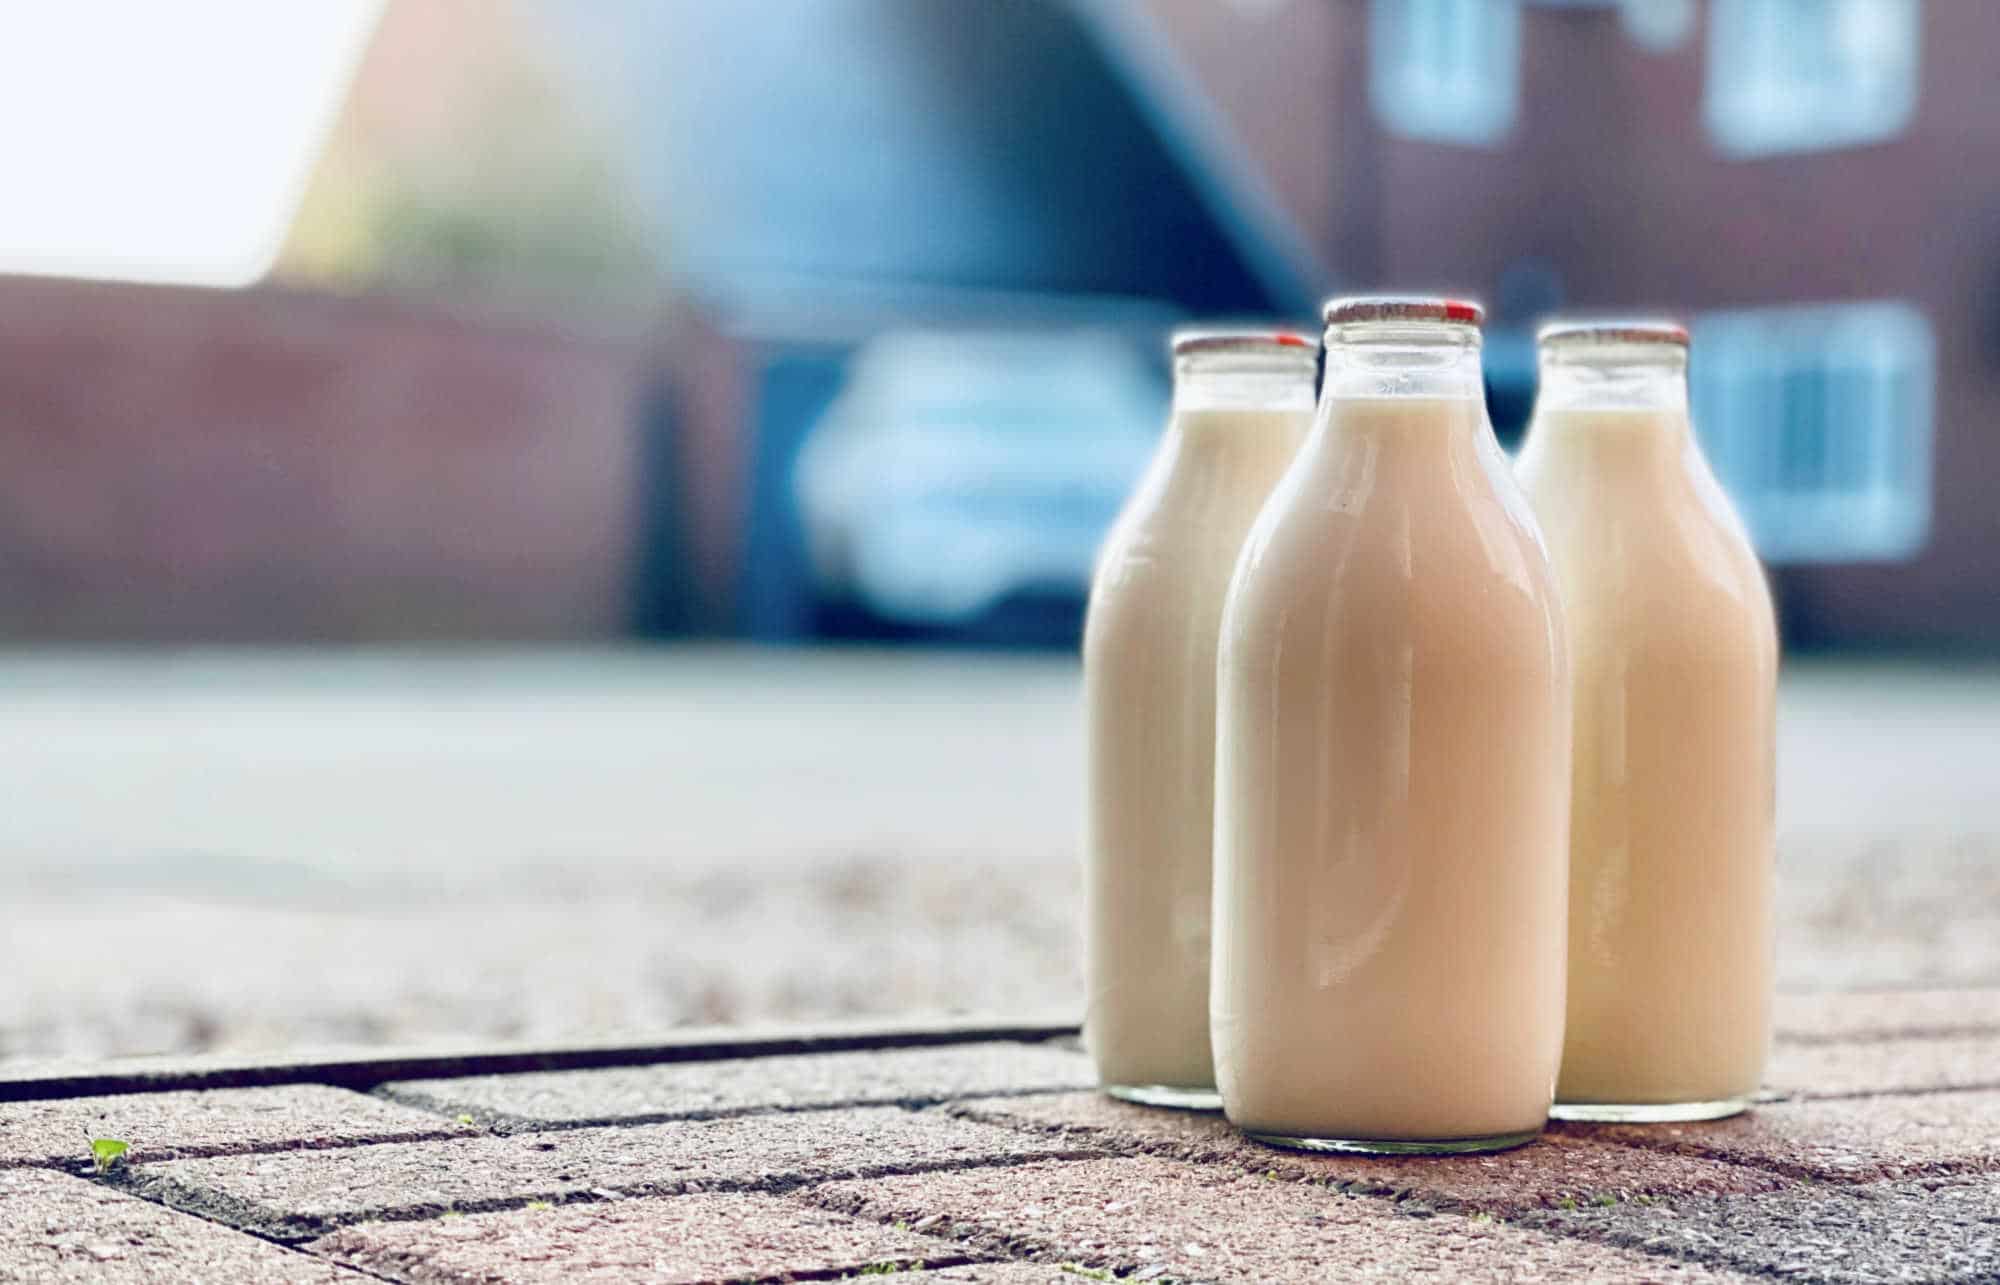 How To Keep Milk Cool on Your Doorstep In Summer